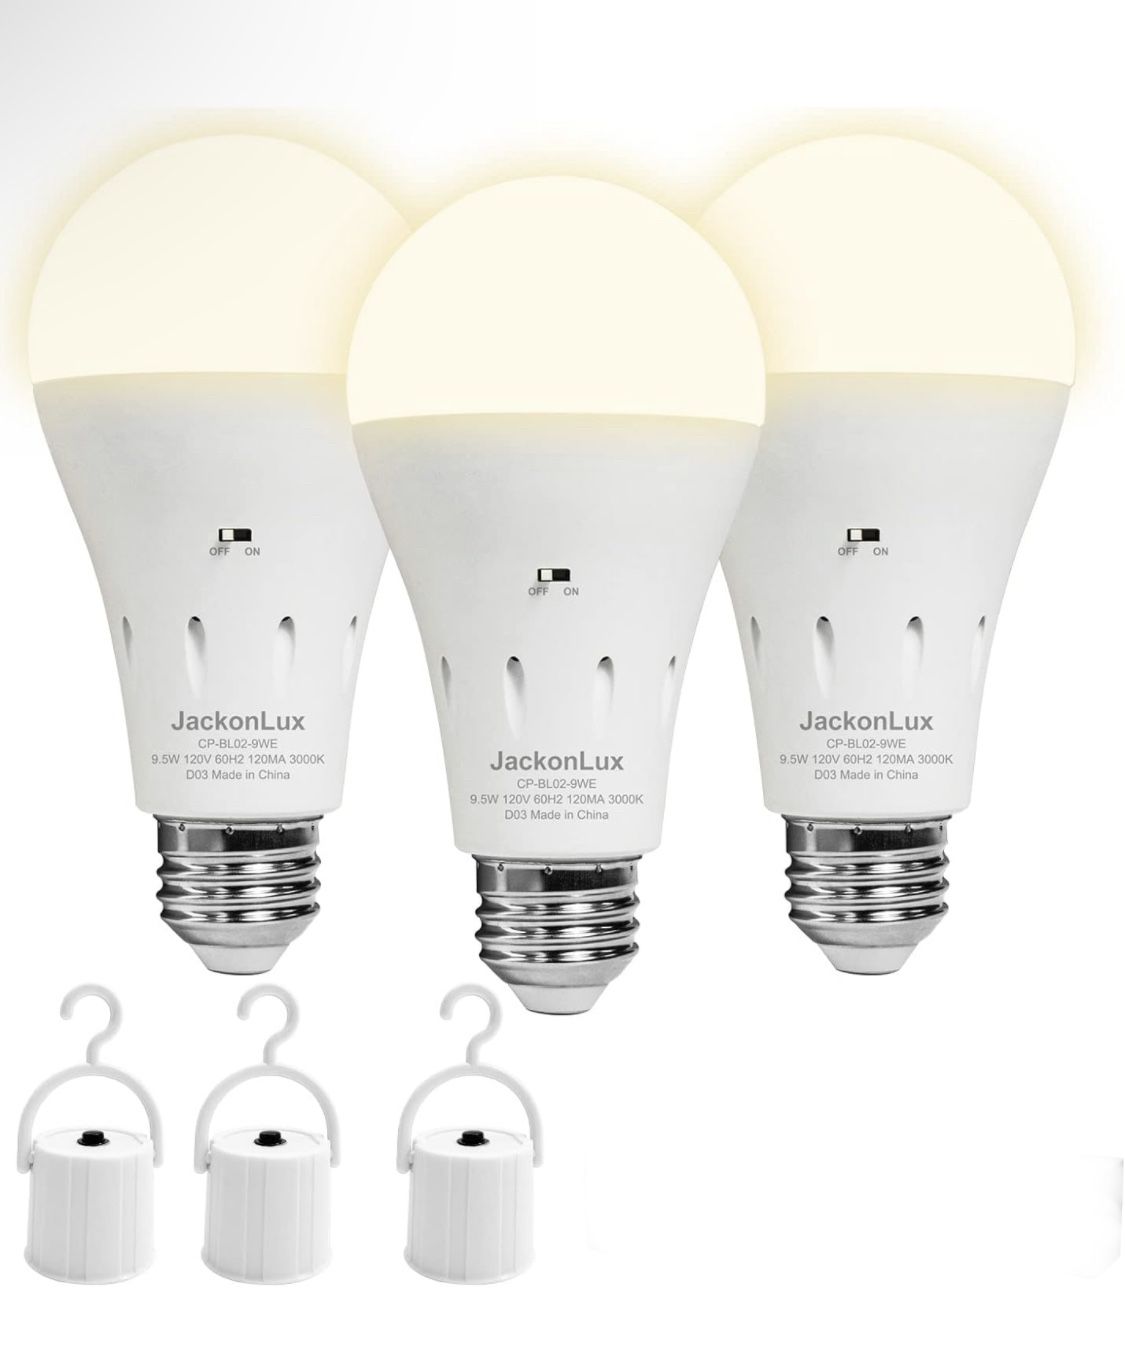 Battery Operated Cordless Light Bulbs That Work Without Electricity